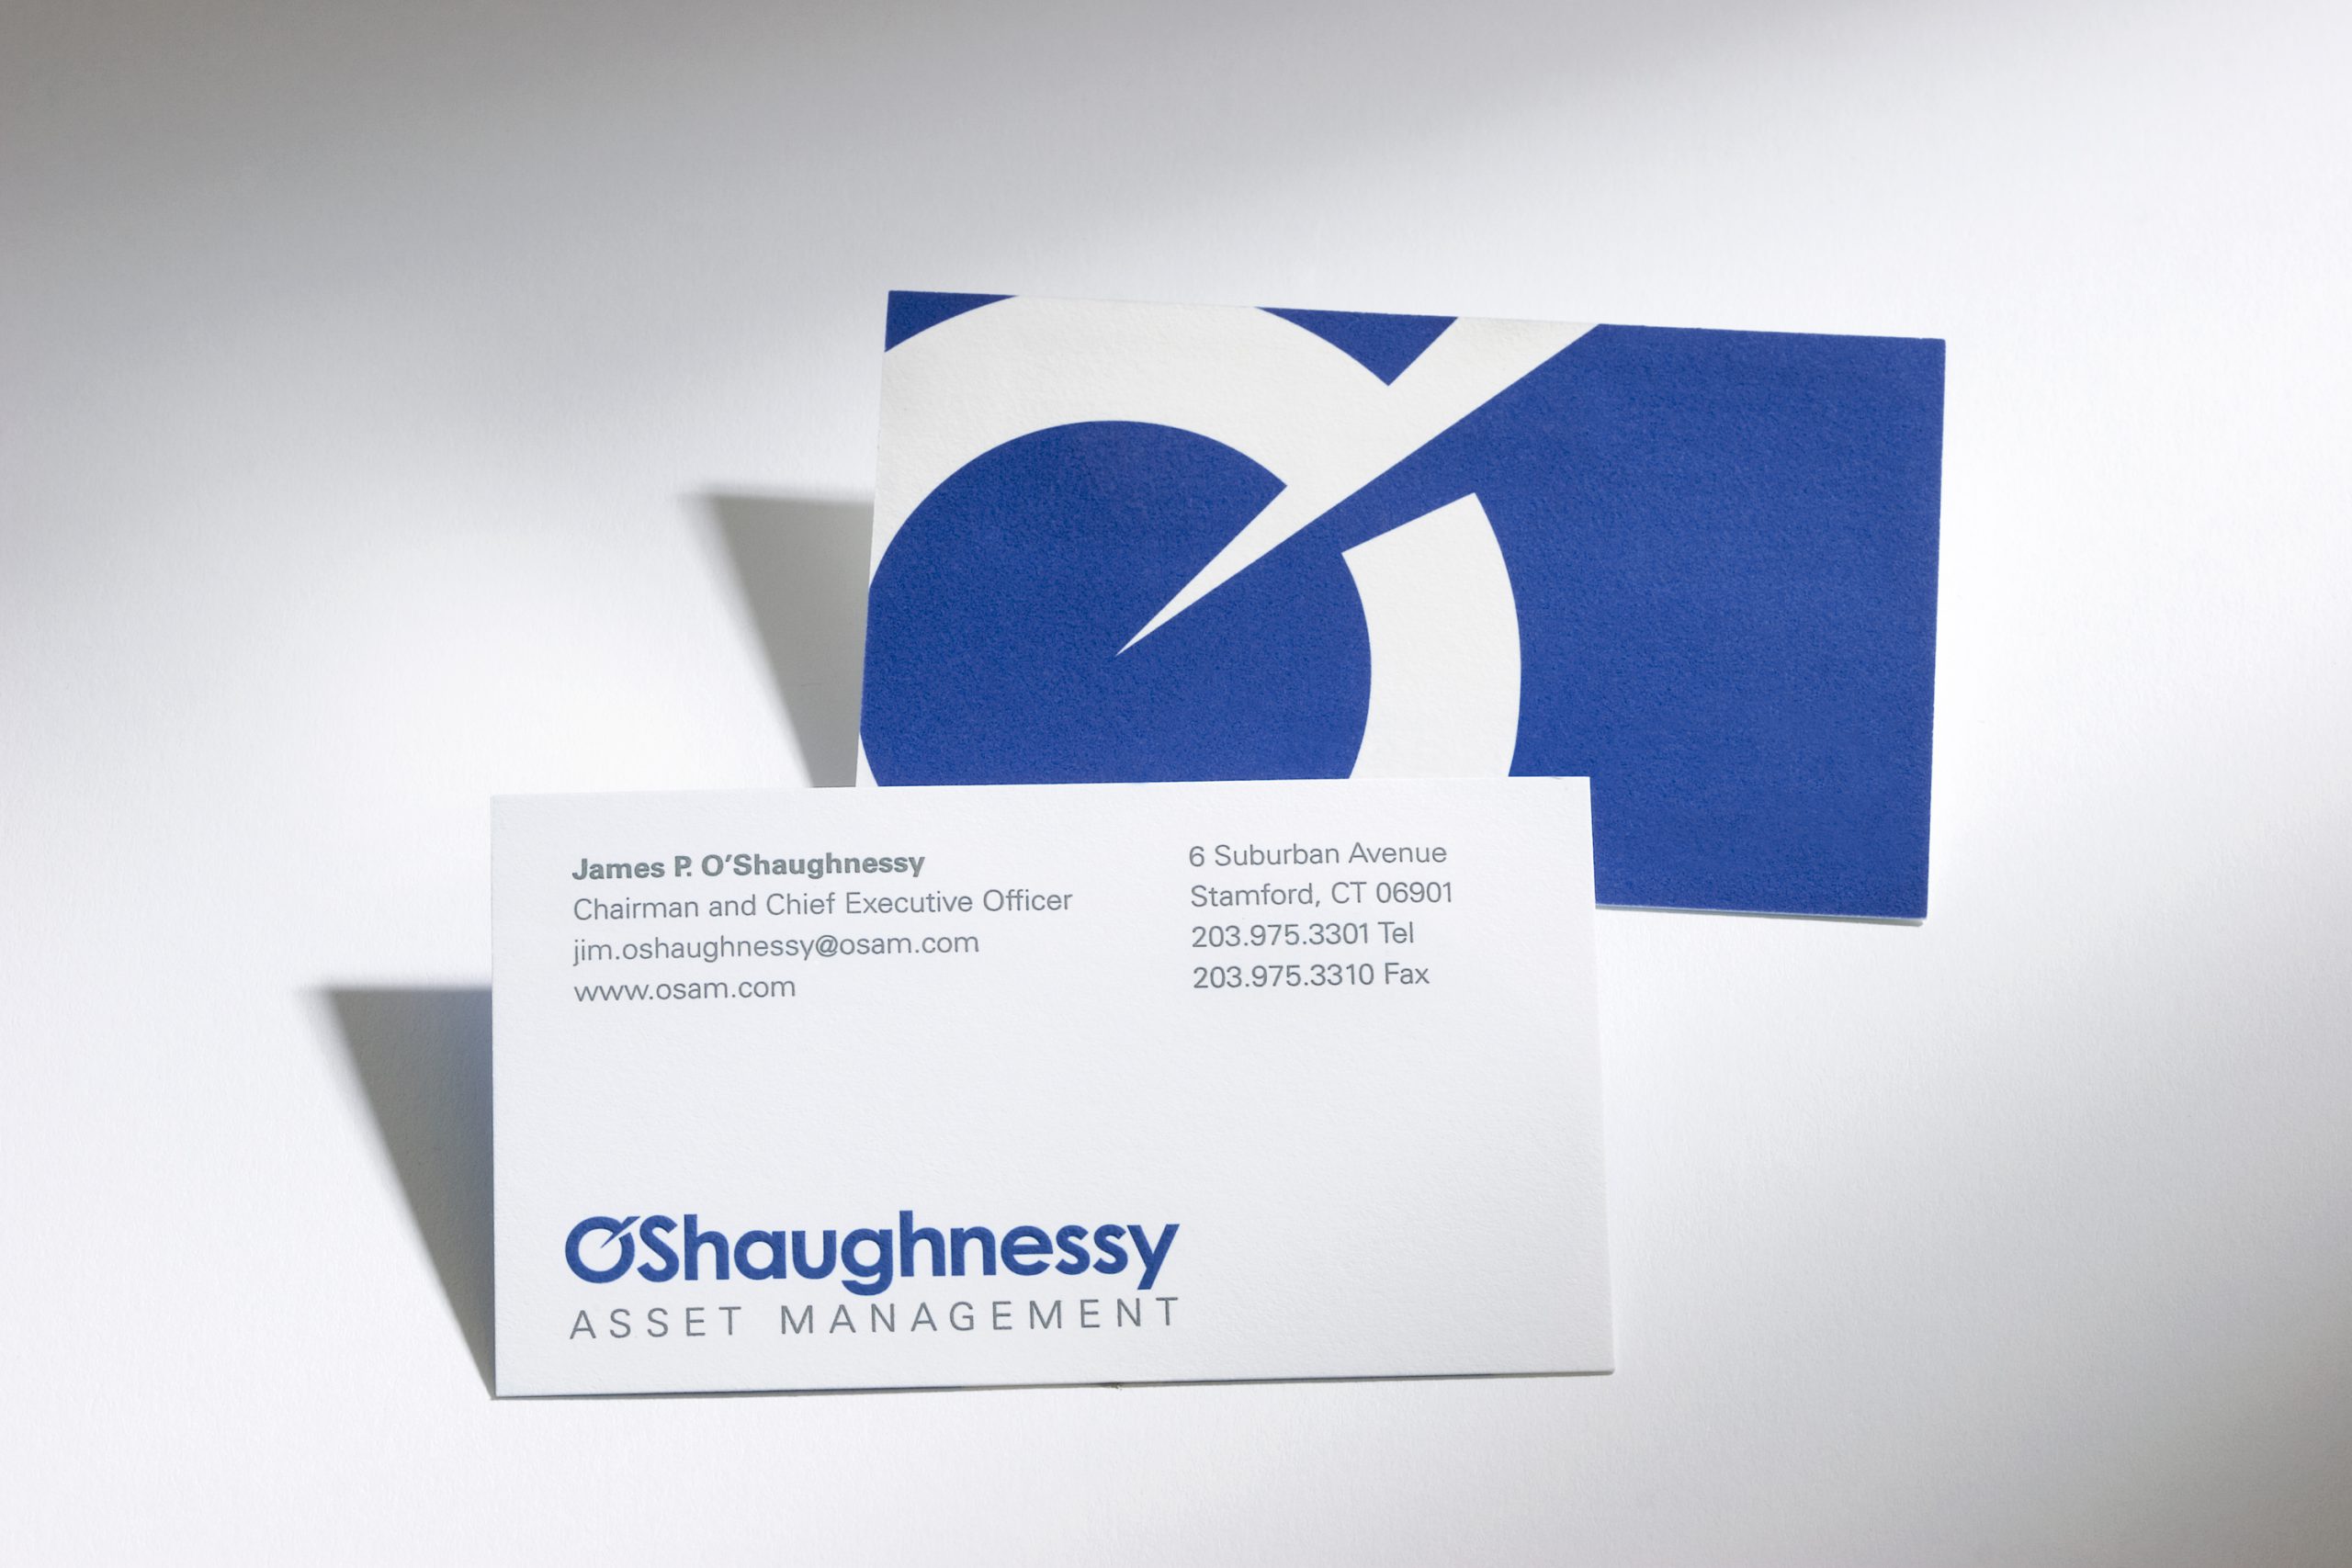 Project image 2 for Identity, O'Shaughnessy Asset Management